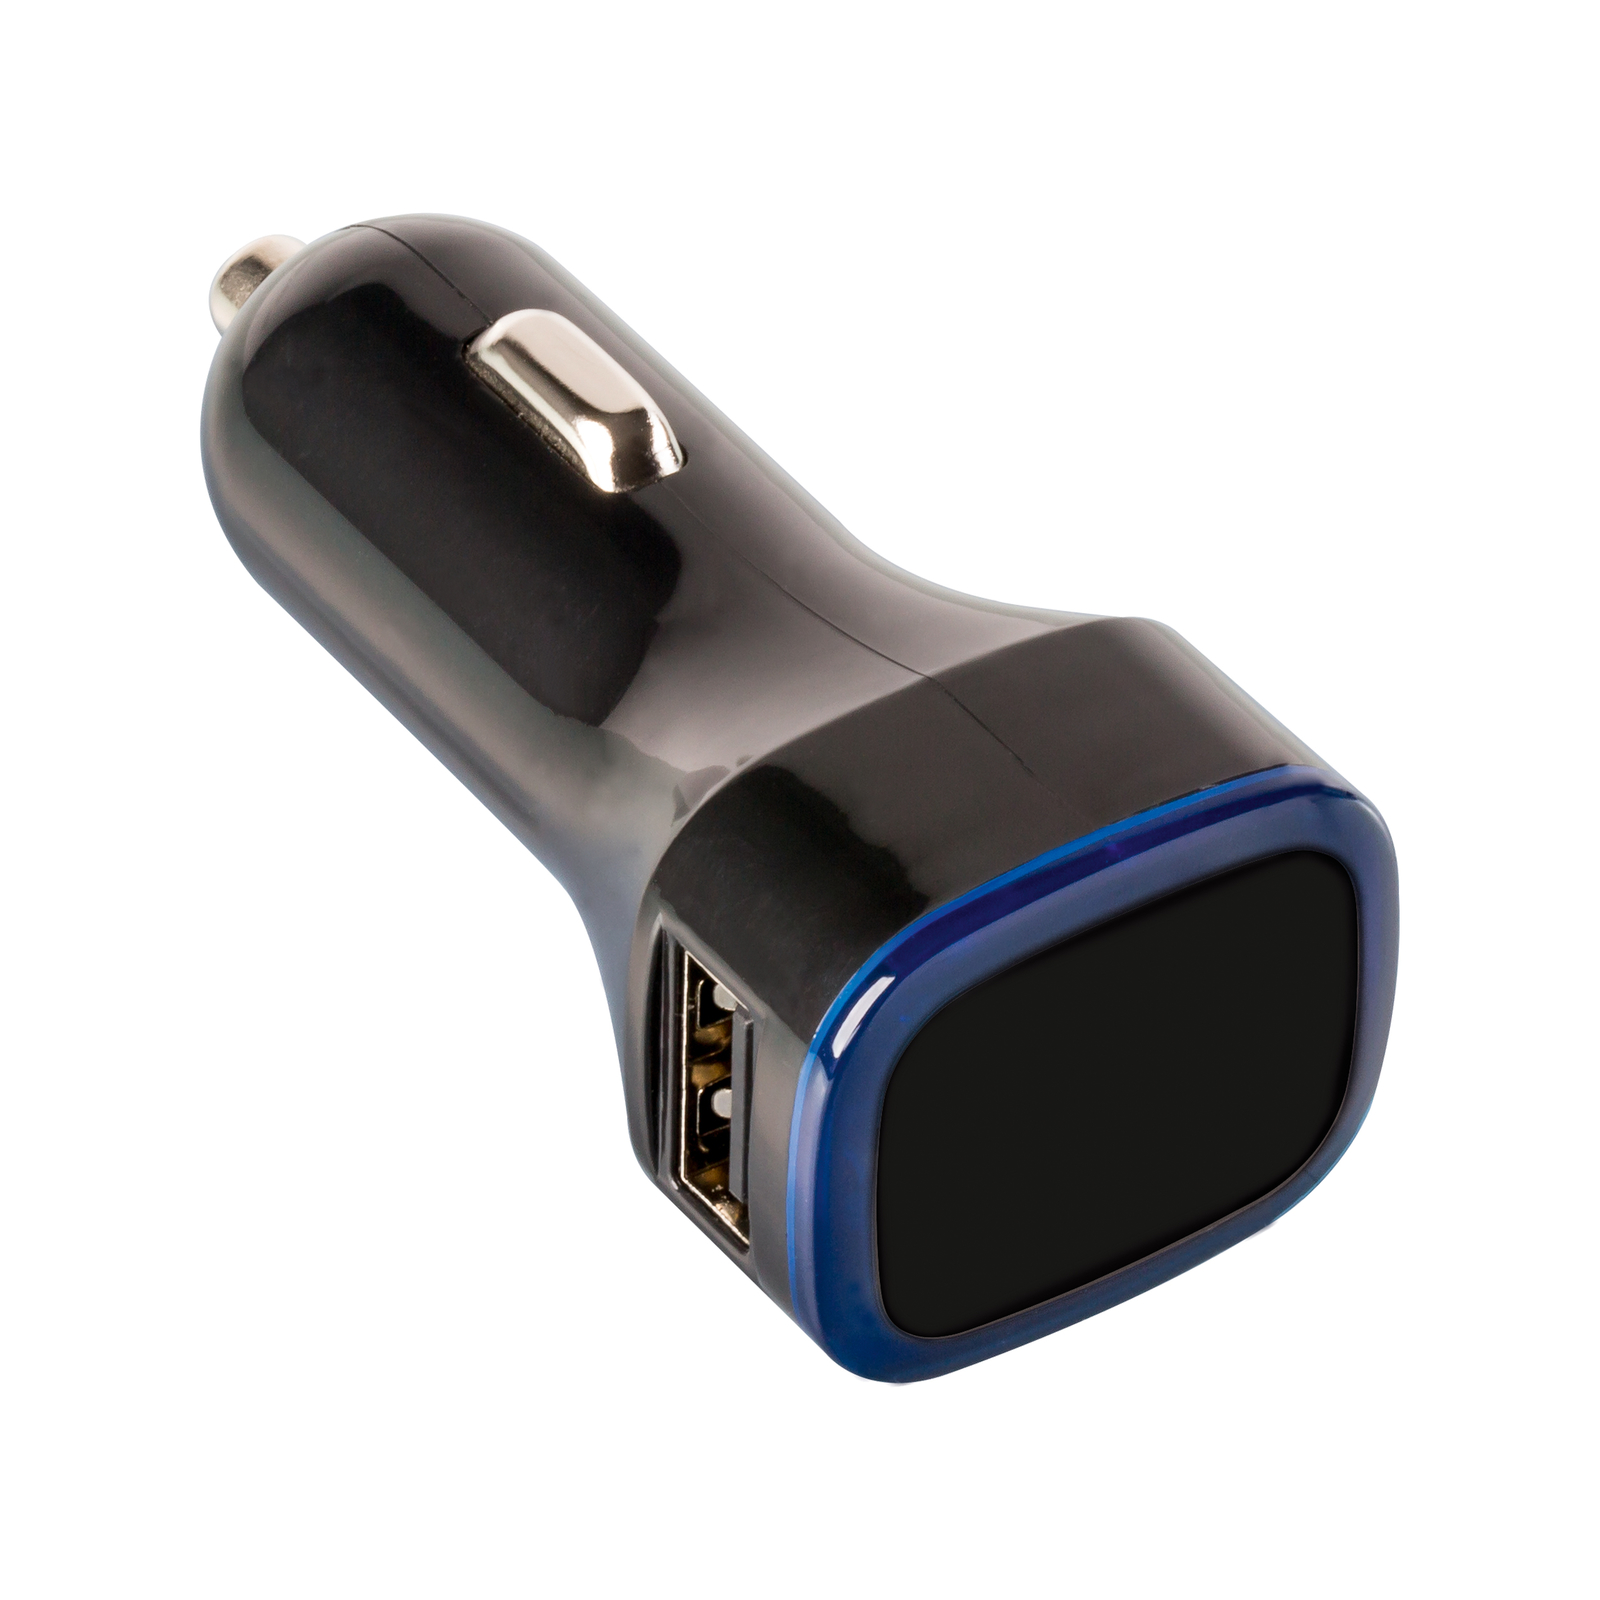 Promotional USB car charger adapter RC 500